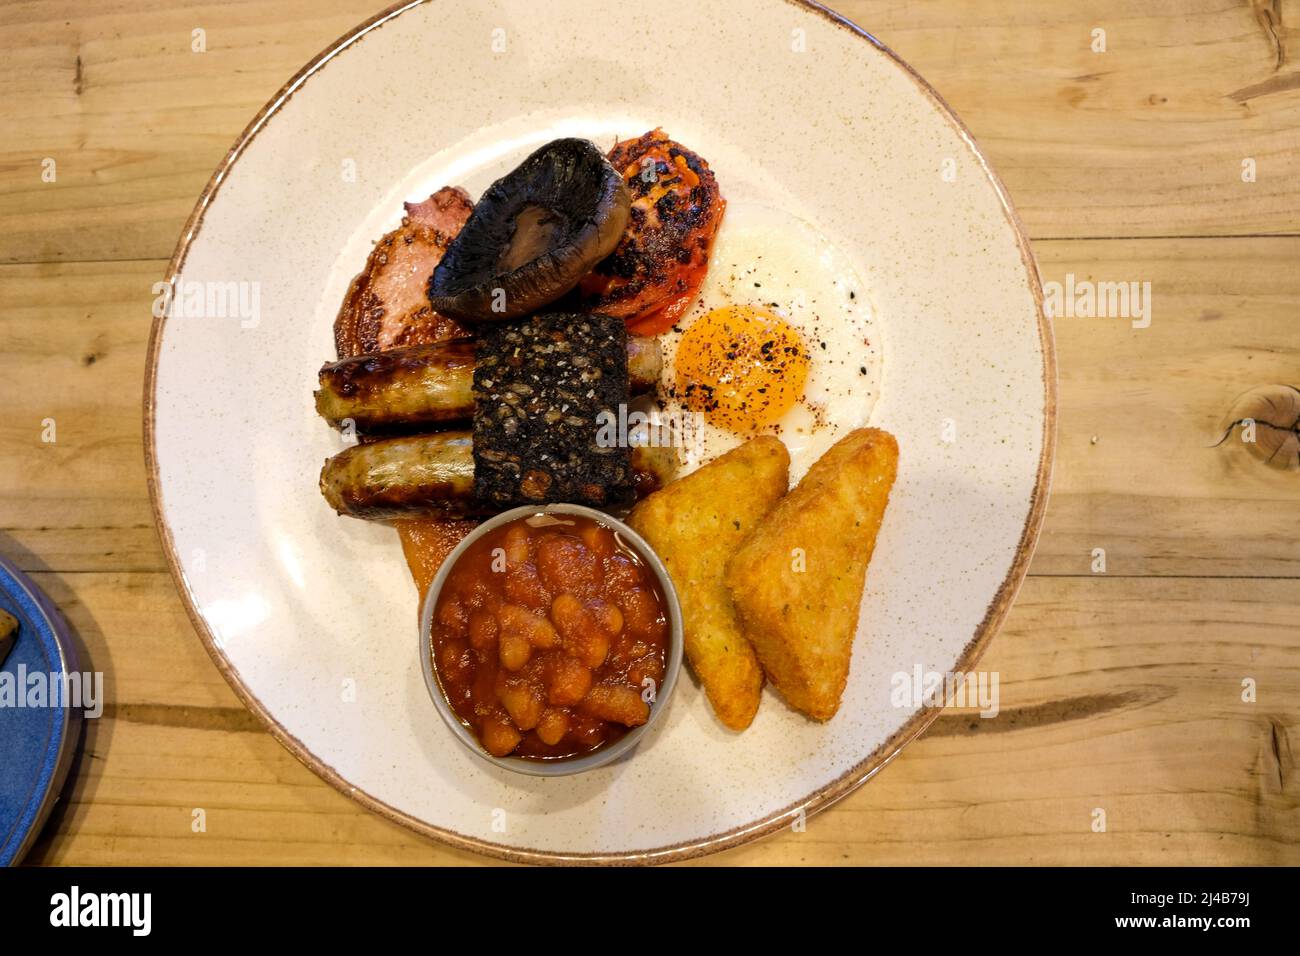 A full english breakfast with sausage bacon egg beans hash brown tomato Stock Photo